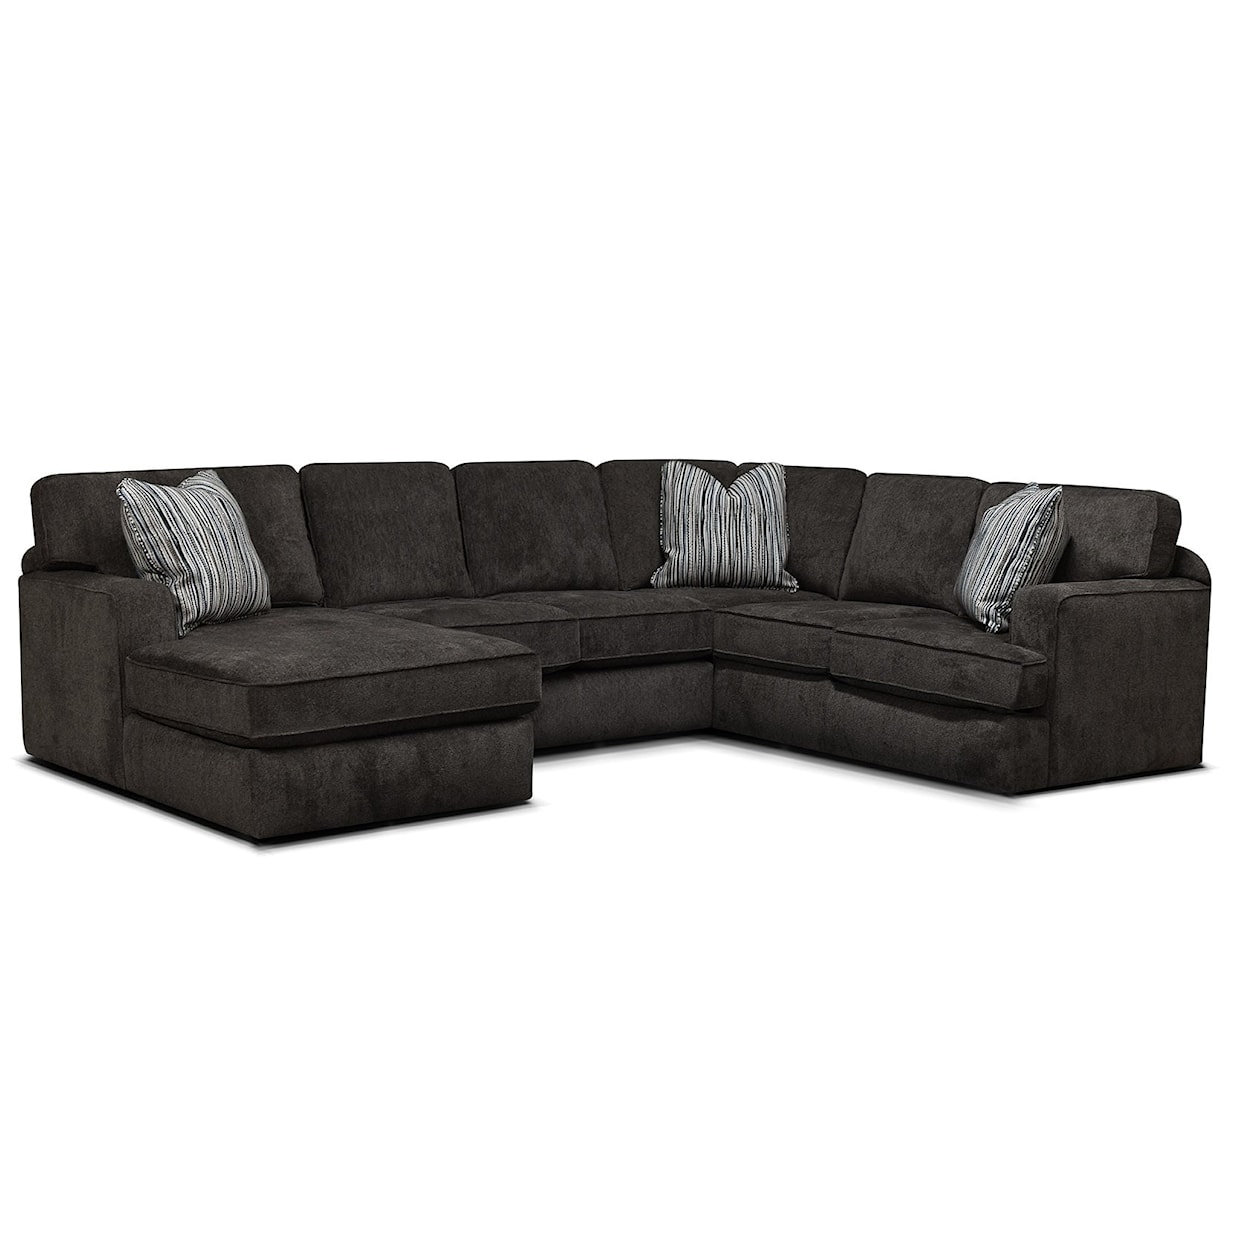 Dimensions 4R00 Series 4-Piece Sectional